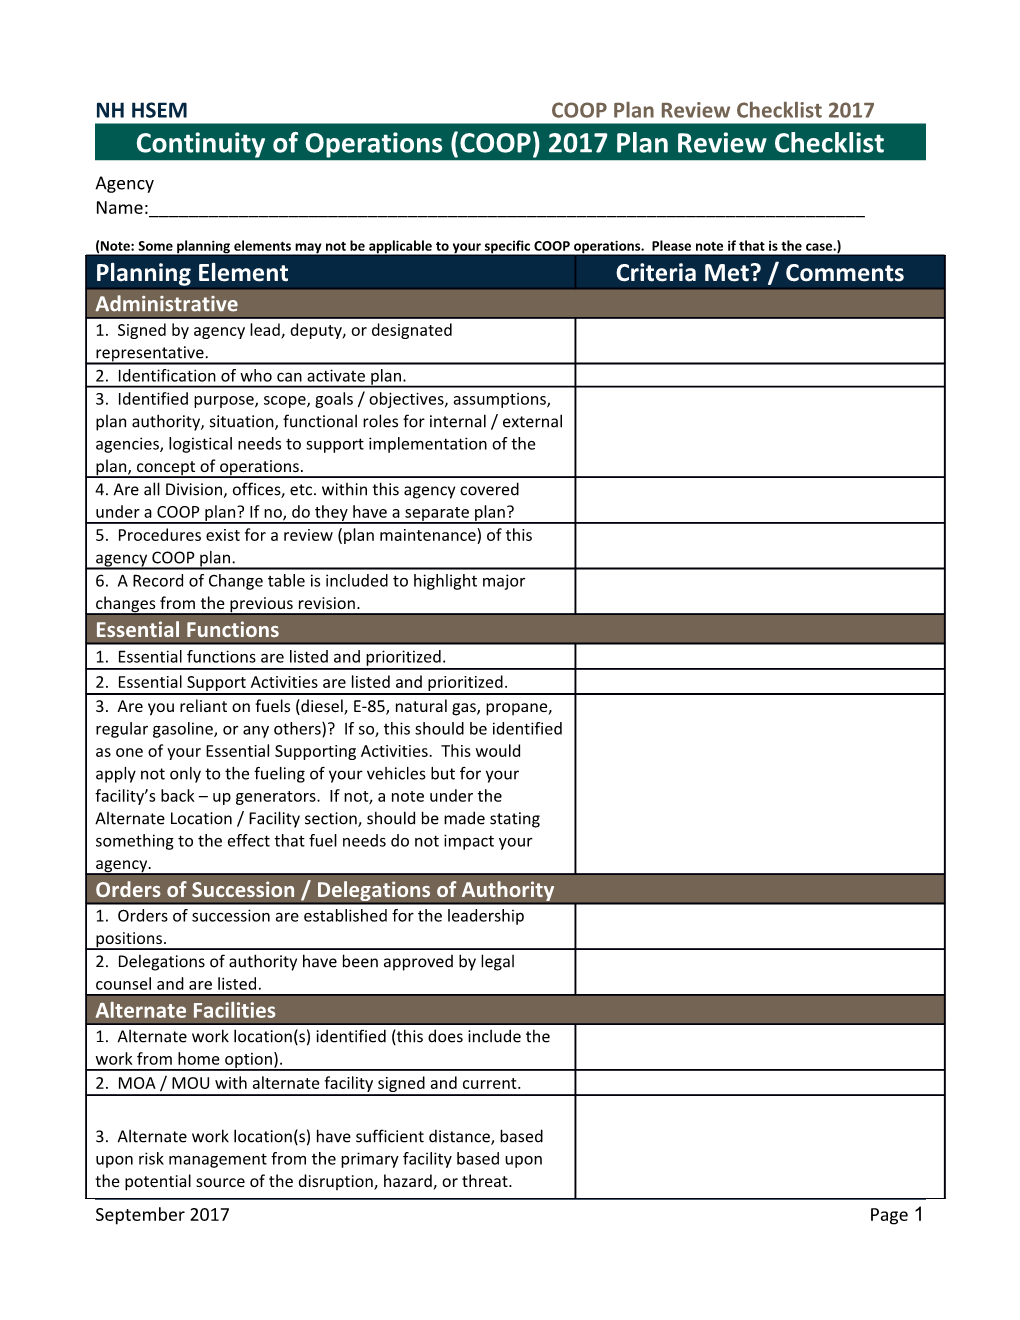 NH HSEMCOOP Plan Review Checklist 2017